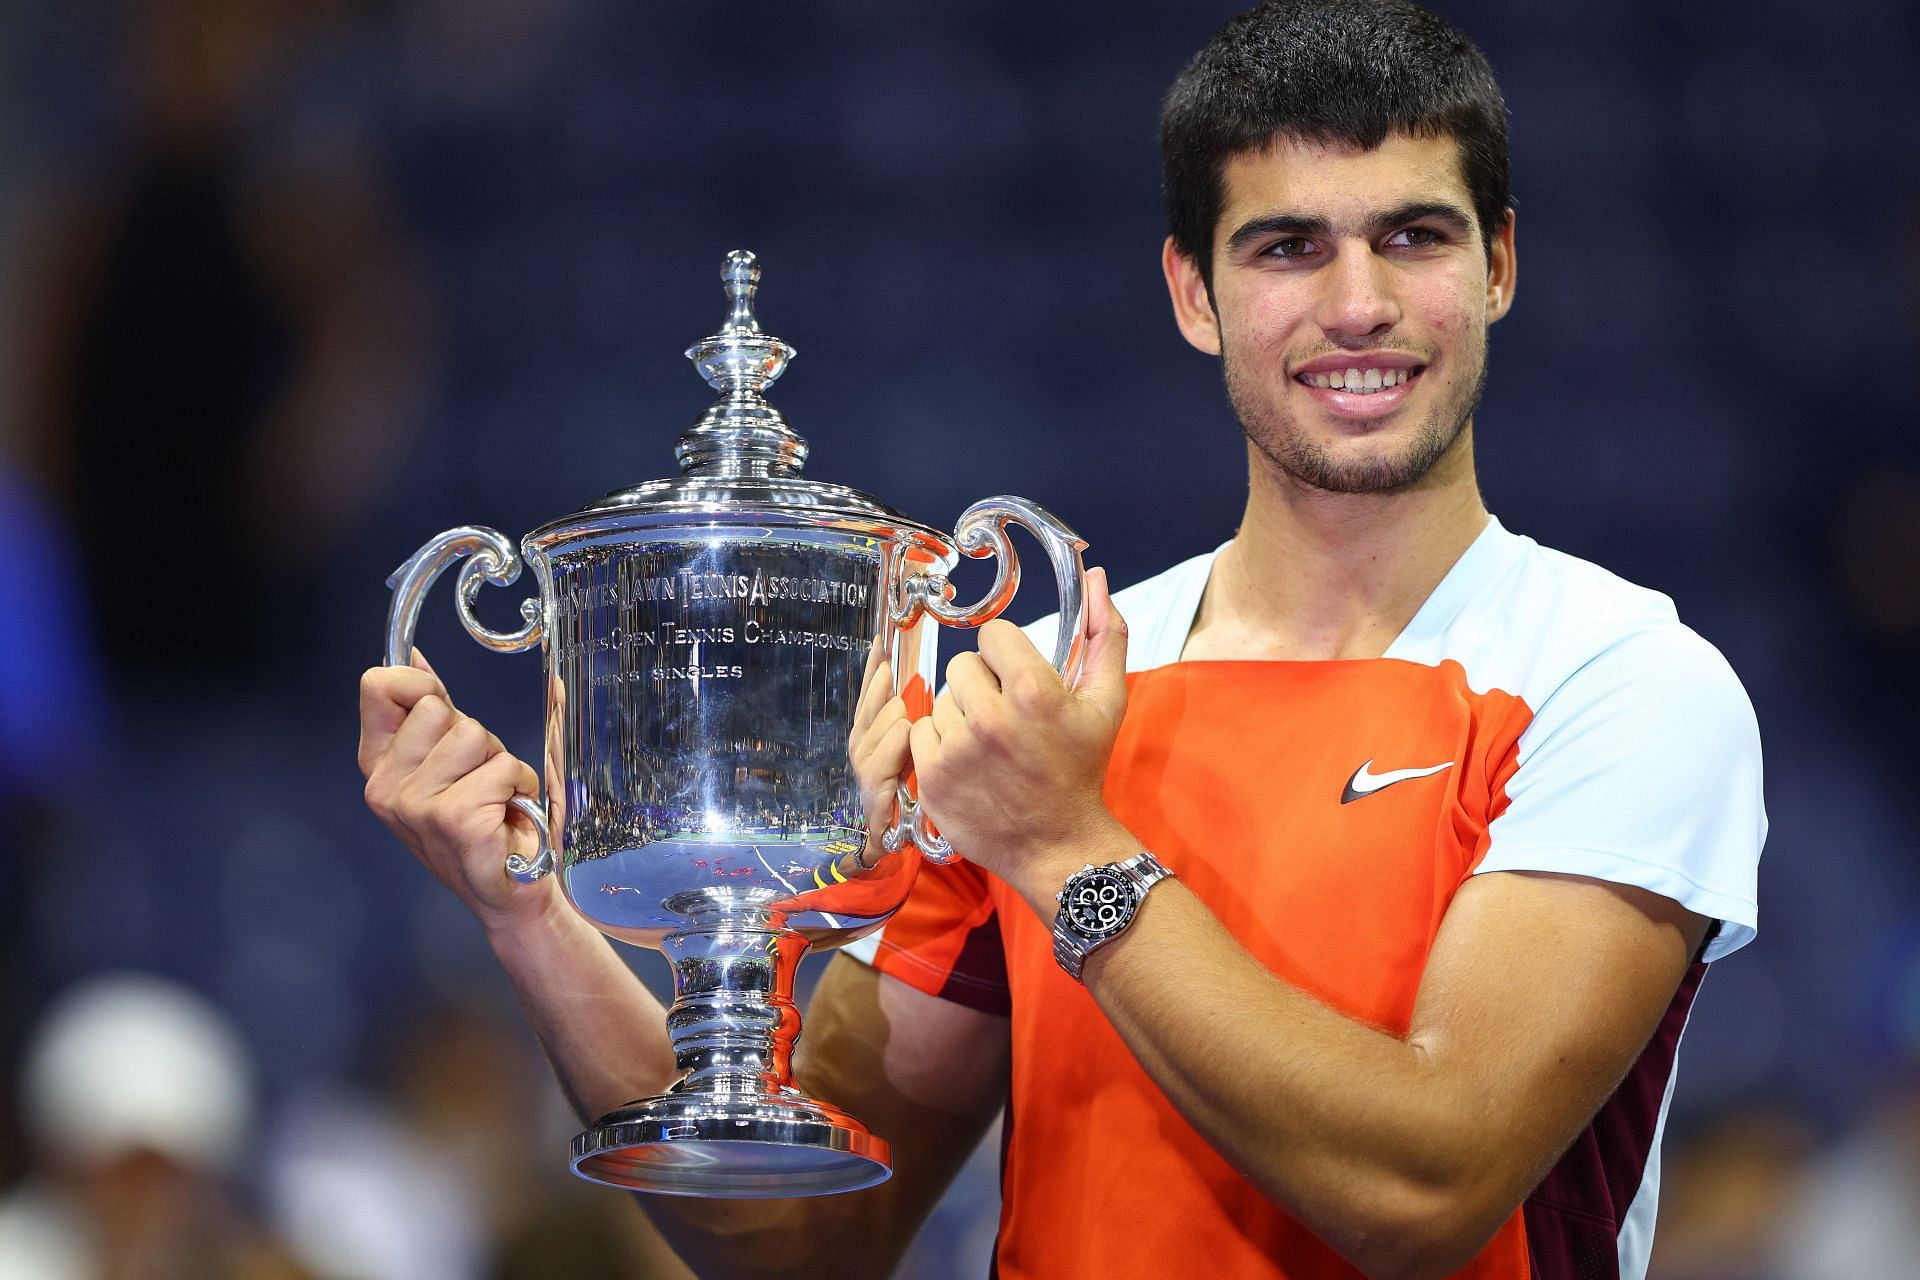 Carlos Alcaraz clinched his maiden Slam at the 2022 US Open and simultaneously became the youngest No. 1 in ATP history